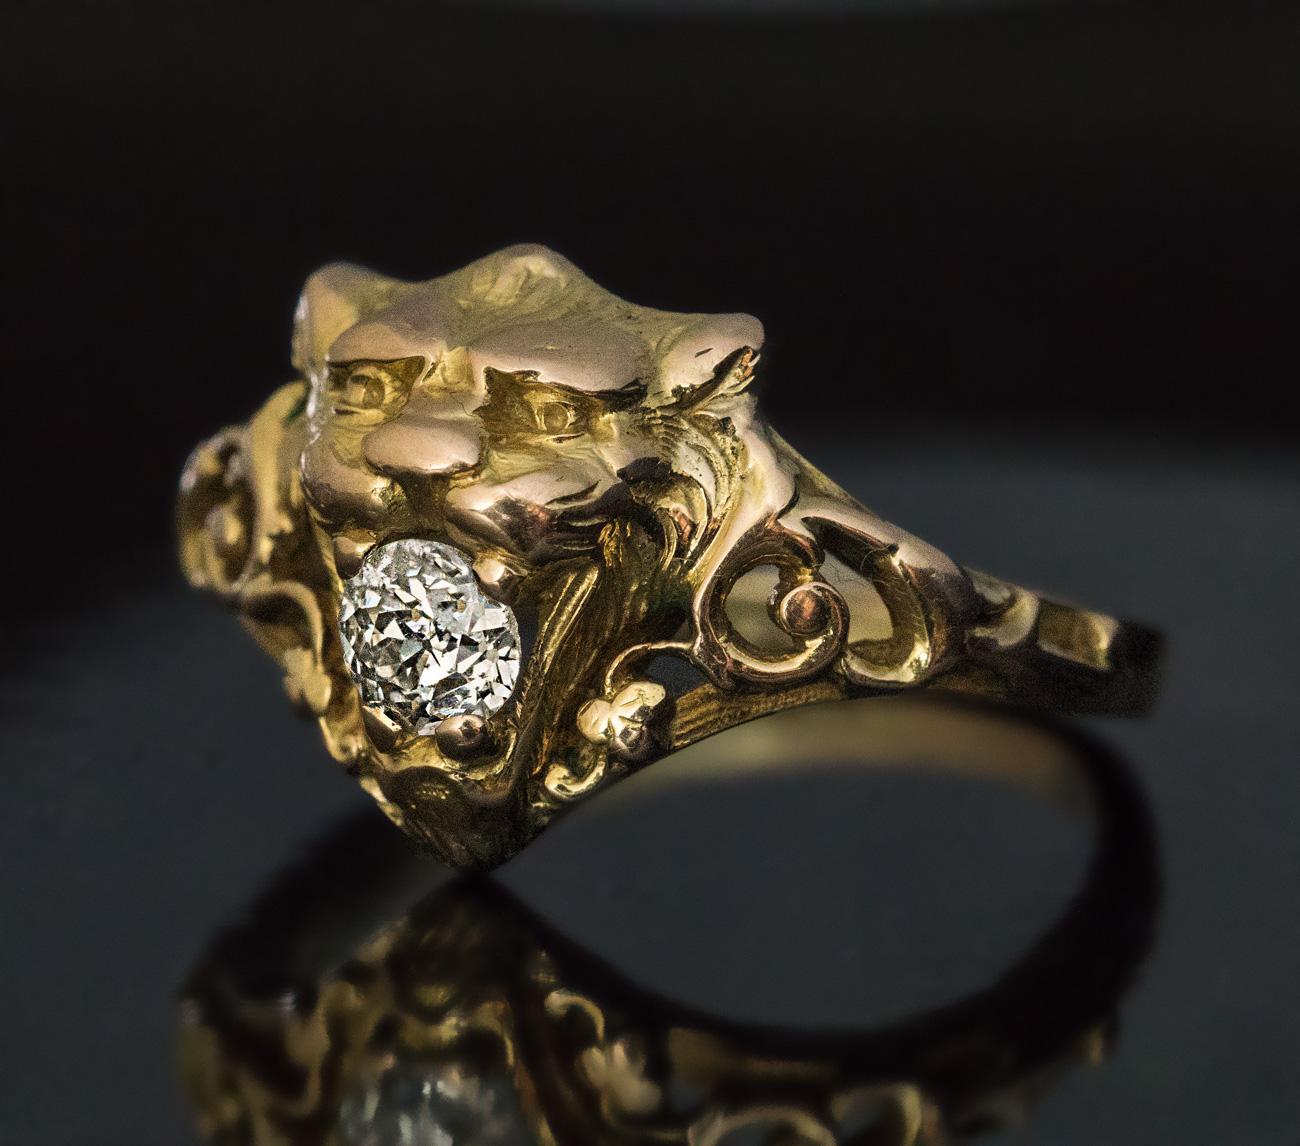 Circa 1890

This antique 14K gold unisex ring is finely modeled as the head of a lion with a sparkling bright white old mine cut diamond in its mouth. The lion is flanked by openwork shoulders with scrolling designs.

The diamond measures 4.68 x